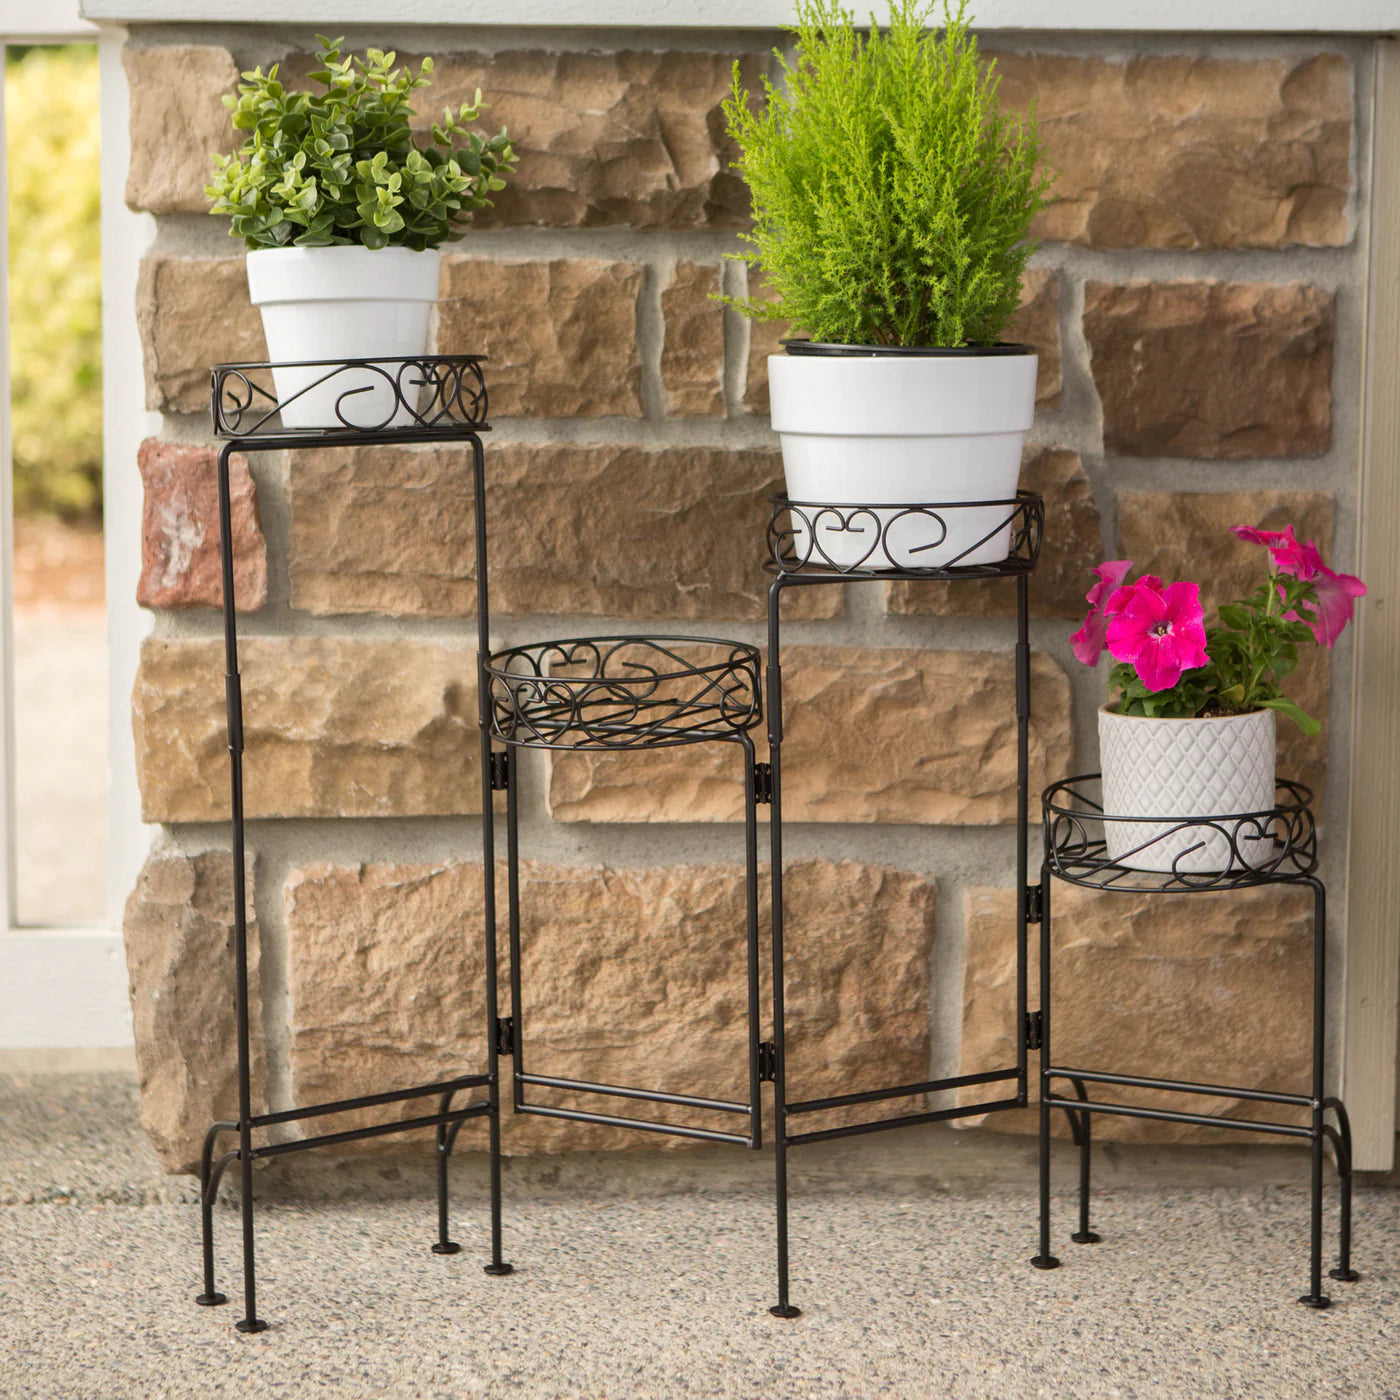 Four Tier Plant Stand Screen